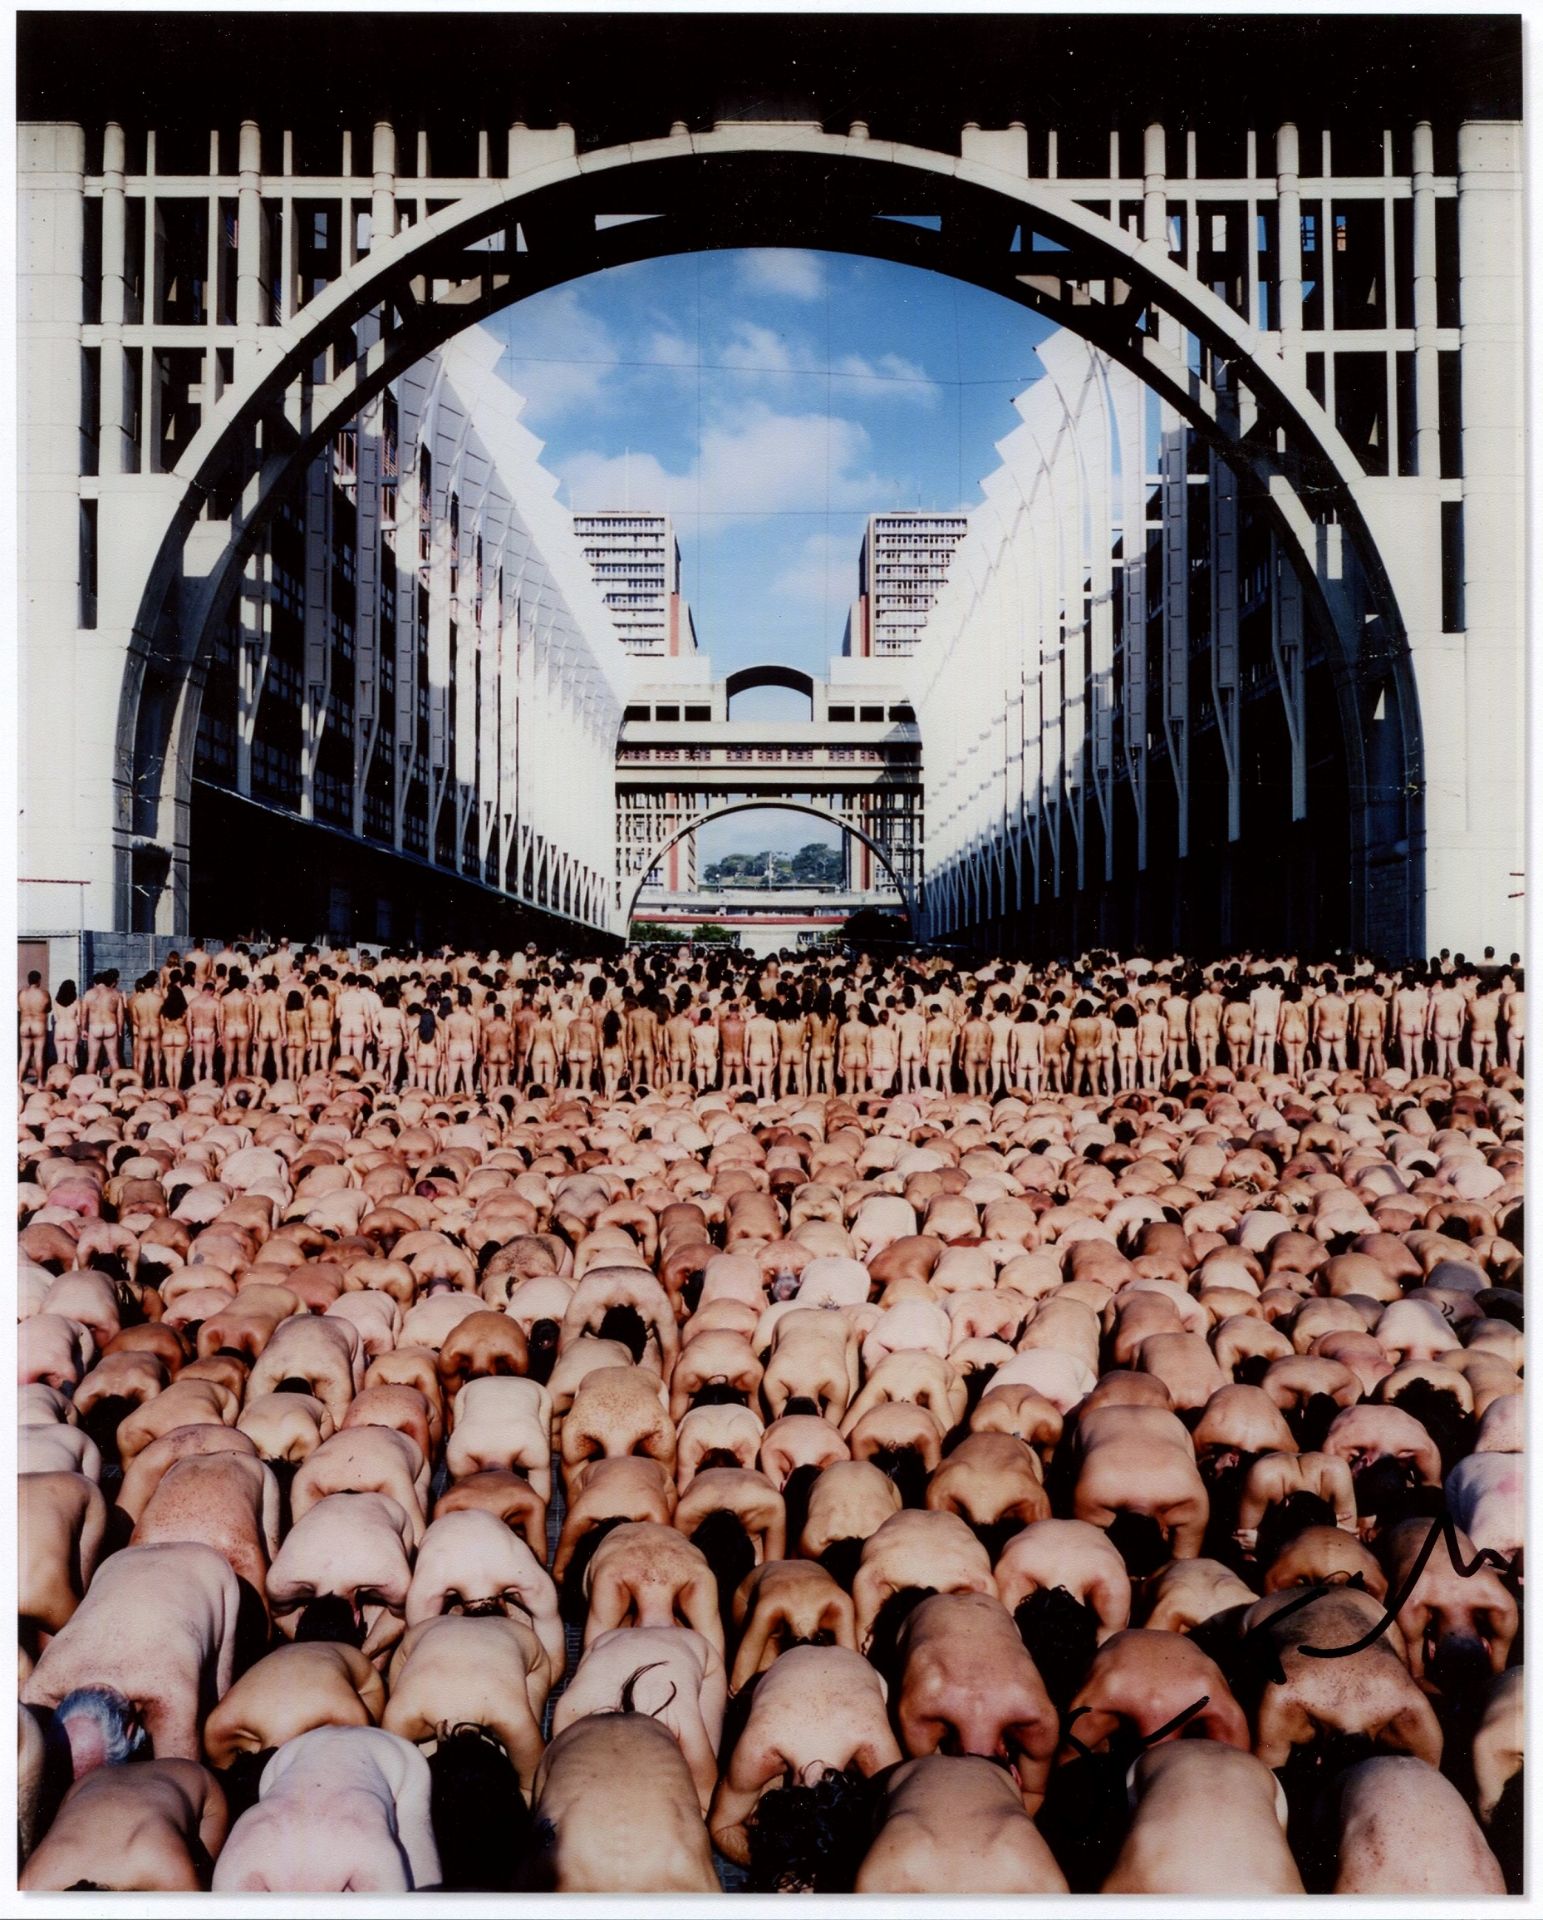 TUNICK SPENCER: (1967- ) American photographer. Signed colour 8 x 10 photograph, the image depicting